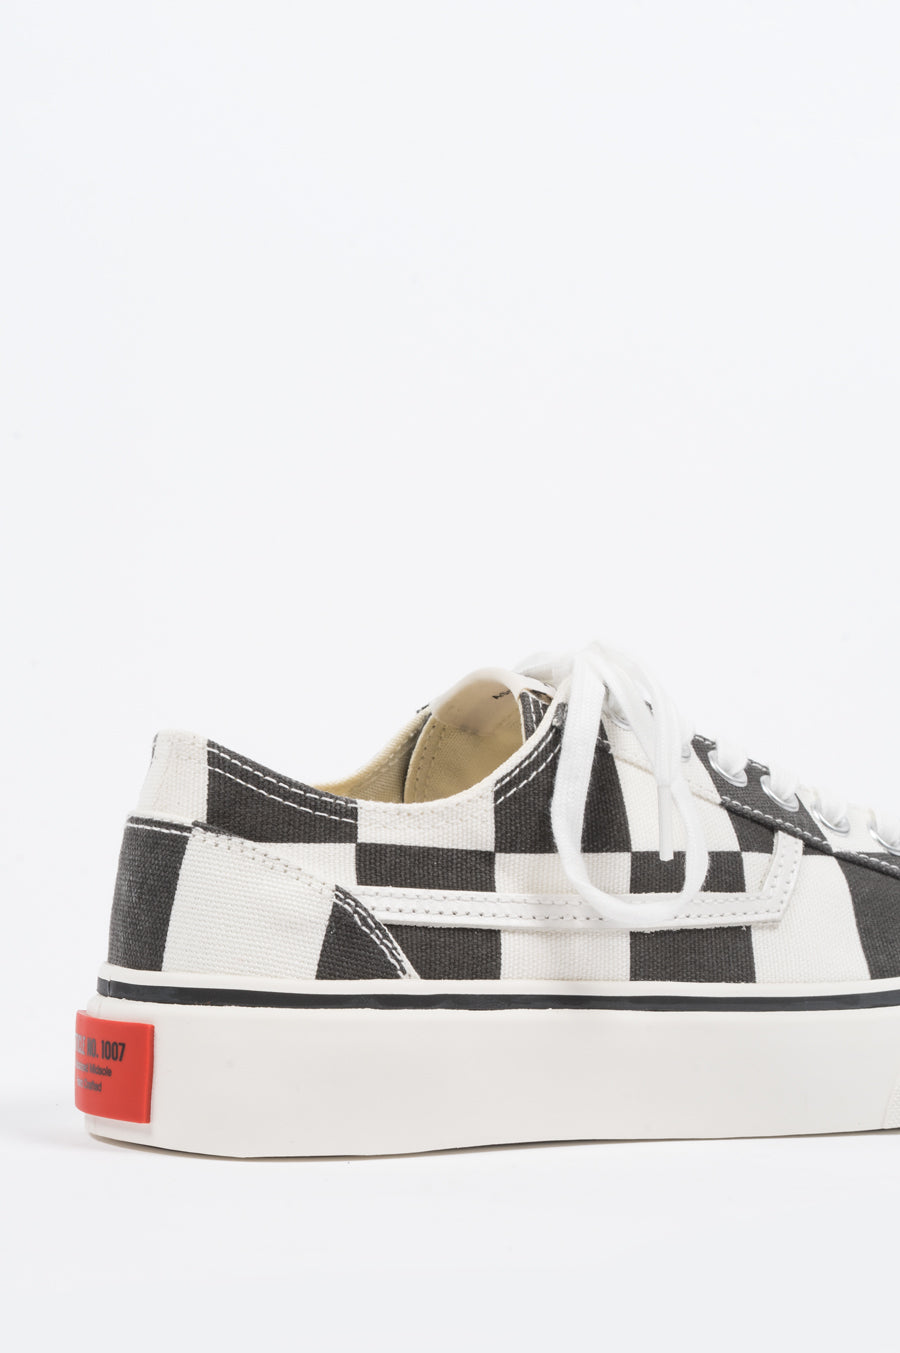 ARTICLE NUMBER 1007 LO TOP VULCANIZED SNEAKER VINTAGE CHECK - BLENDS